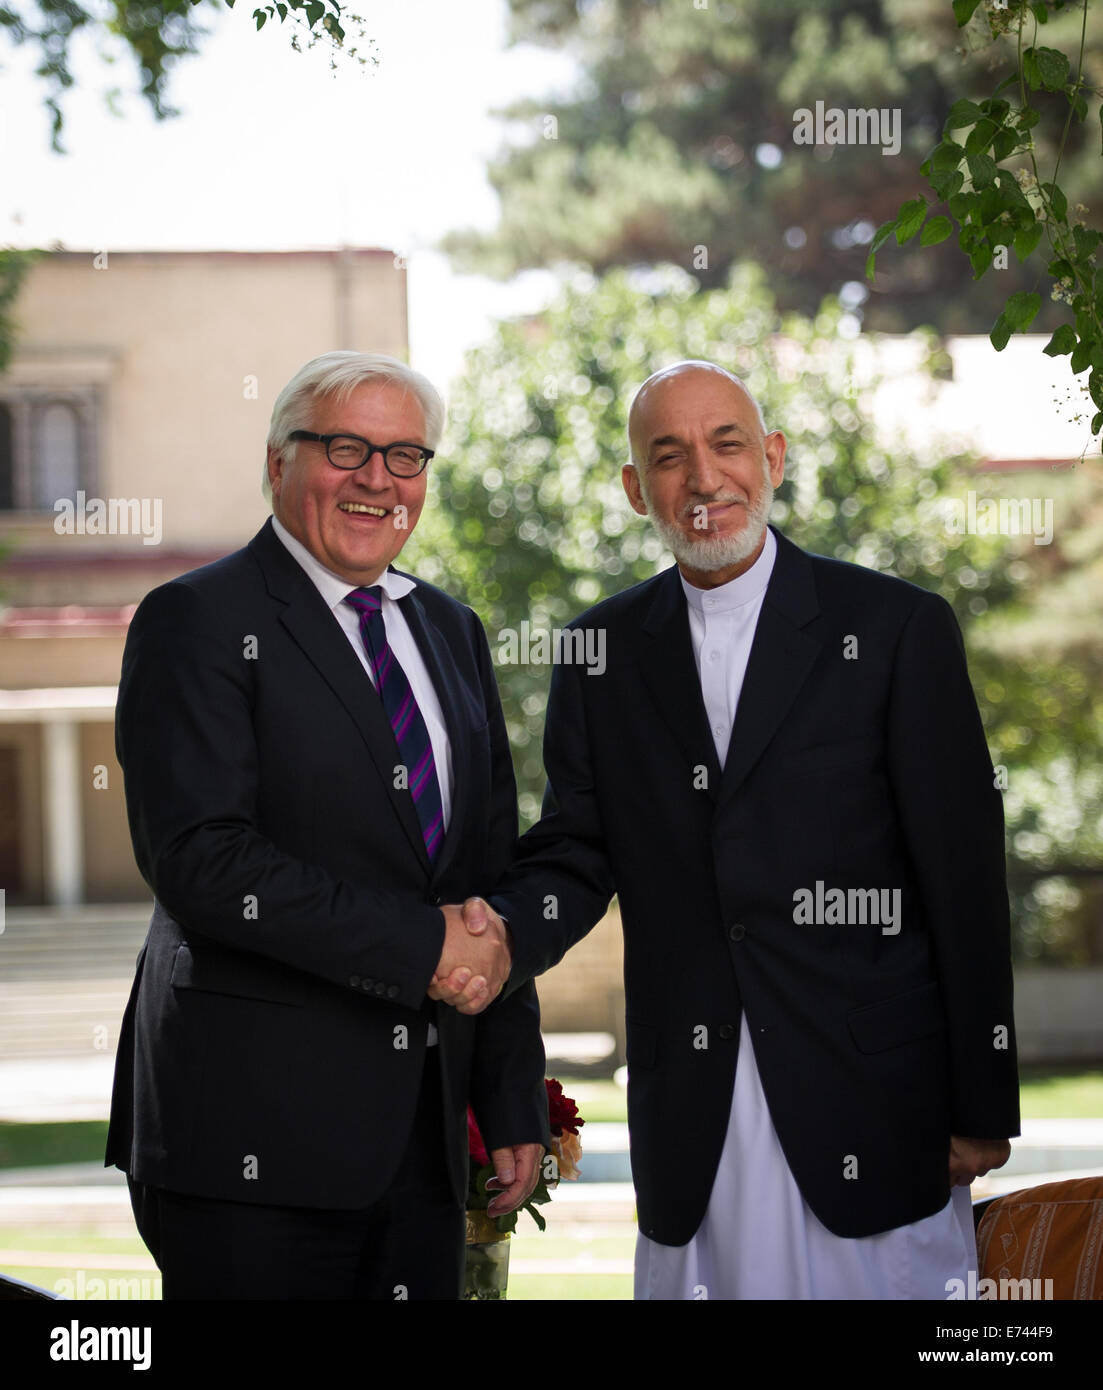 Kabul, Afghanistan. 6th Sep, 2014. German Foreign Minister Frank-Walter Steinmeier (SPD, L) talks to Afghan President Hamid Karsai at the presidential palace in Kabul, Afghanistan, 6 September 2014. Steinmeier is on a one-day visit to Afghanistan. Photo: Maja Hitij/dpa/Alamy Live News Stock Photo